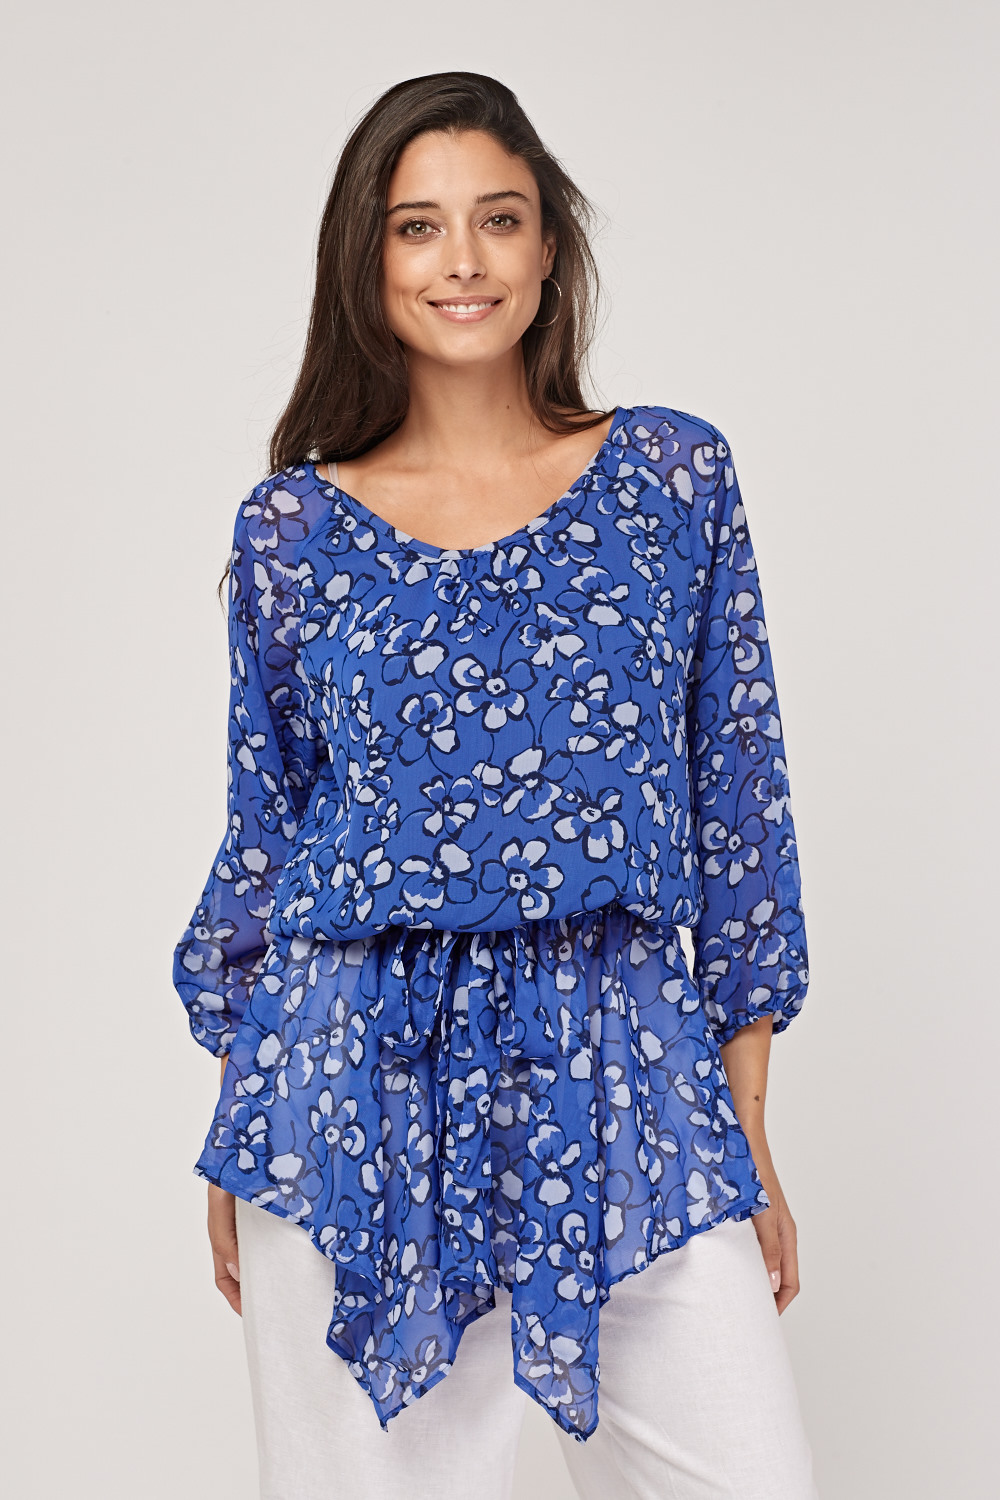 Floral Sheer Tunic Blouse - Just $7